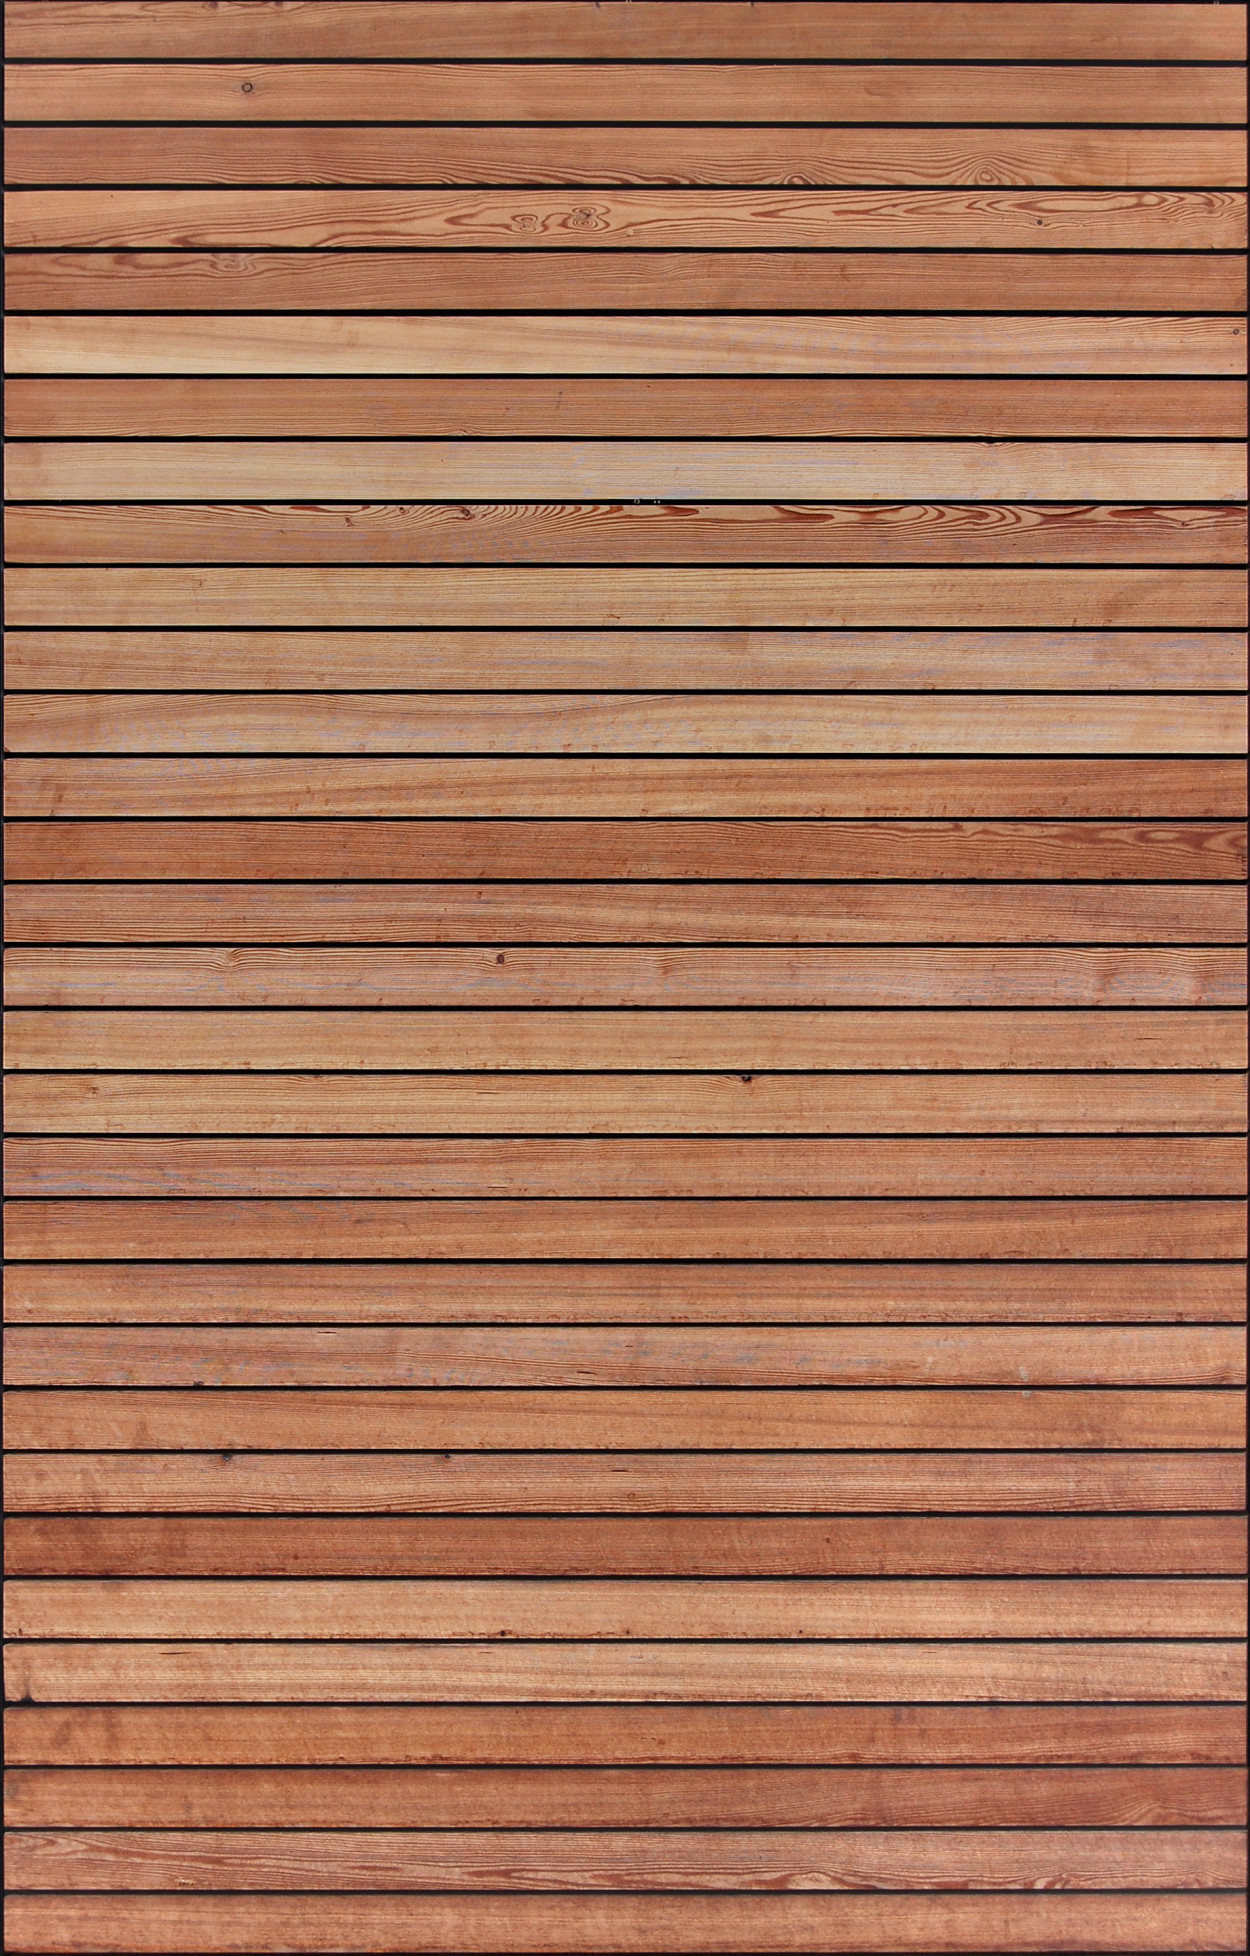 A seamless timber boards (villach) texture for use in architectural drawings and 3D models